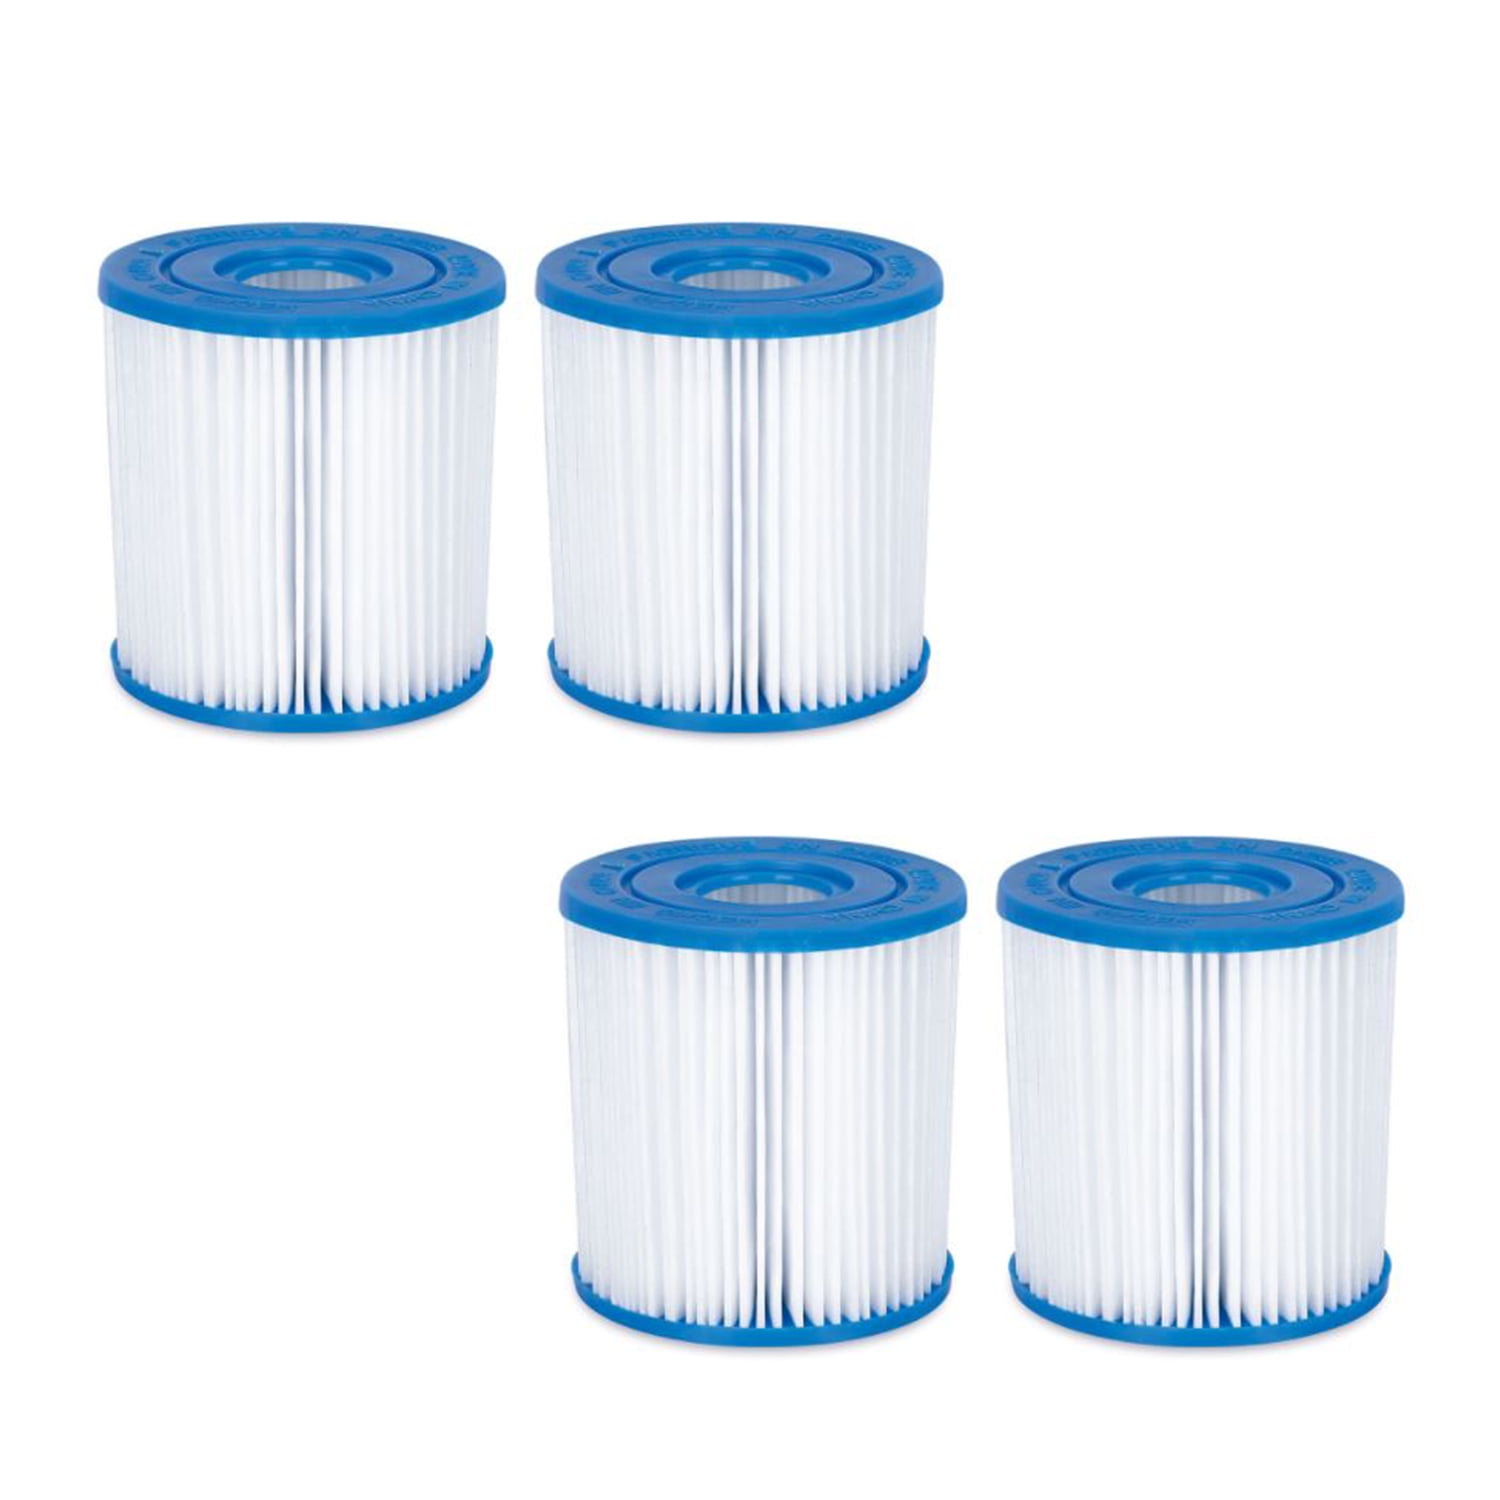 Summer Waves Pool Filter Cartridge Replacement Type A C 2 Pack Polygroup Intex 